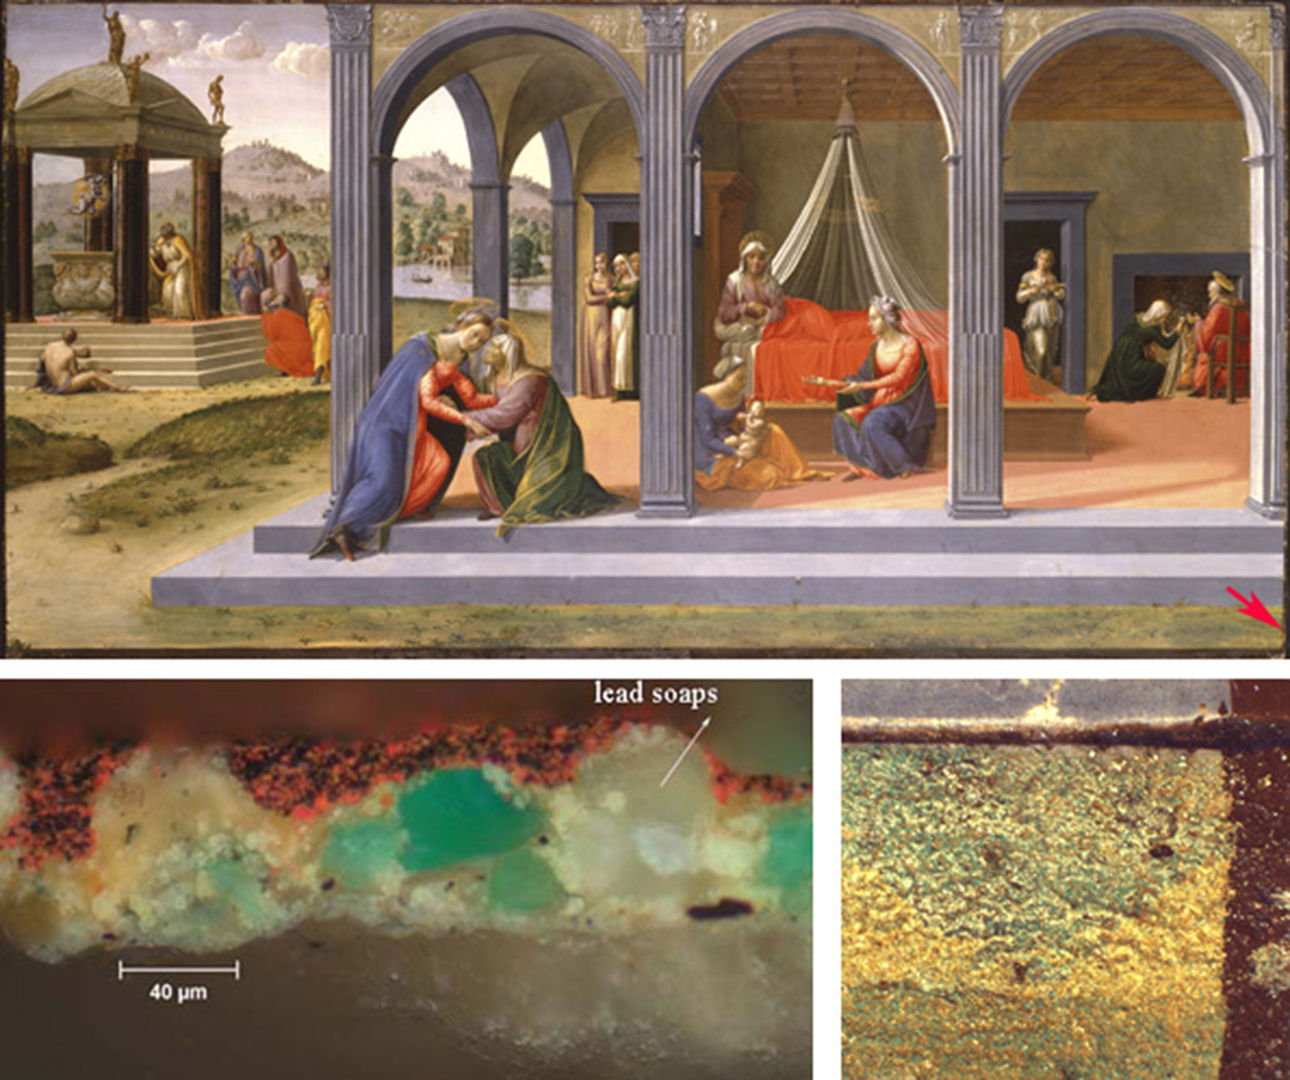 Francesco Granacci, The Birth of Saint John the Baptist, ca. 1506–1507. The cross-section of a paint sample removed from the grass area, in lower right border, was found to contain lead soaps protruding through the paint surface that give rise to the granular to surface texture of the paint.